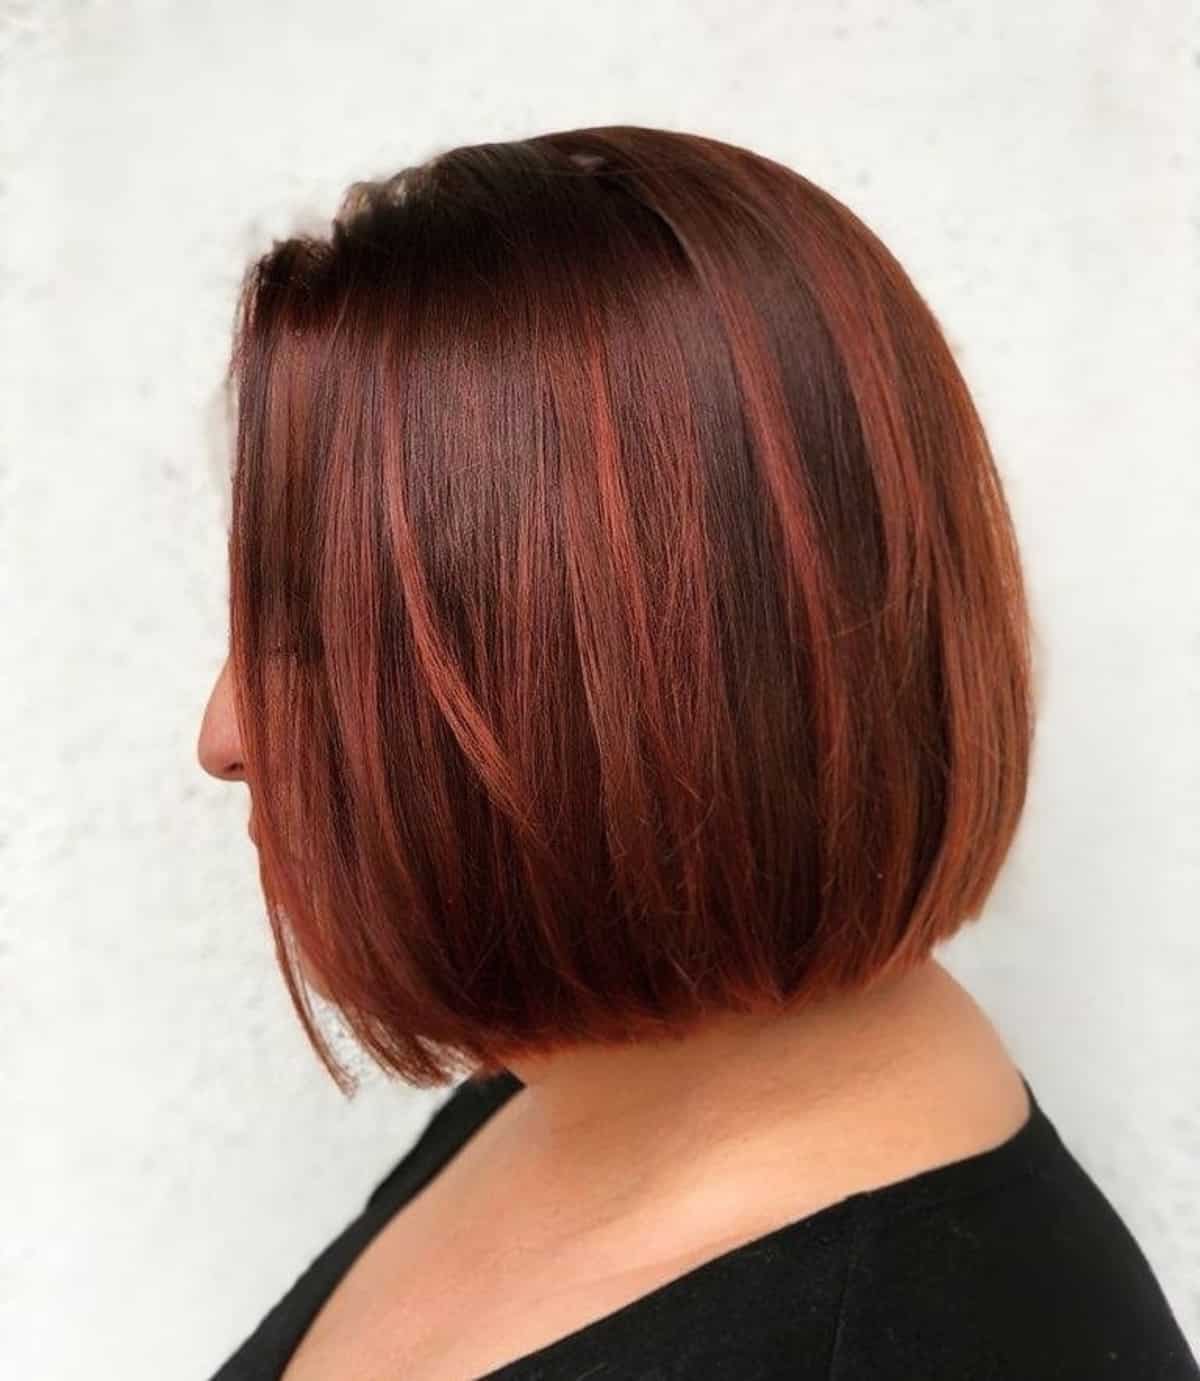 Red and dark brown hair with highlights